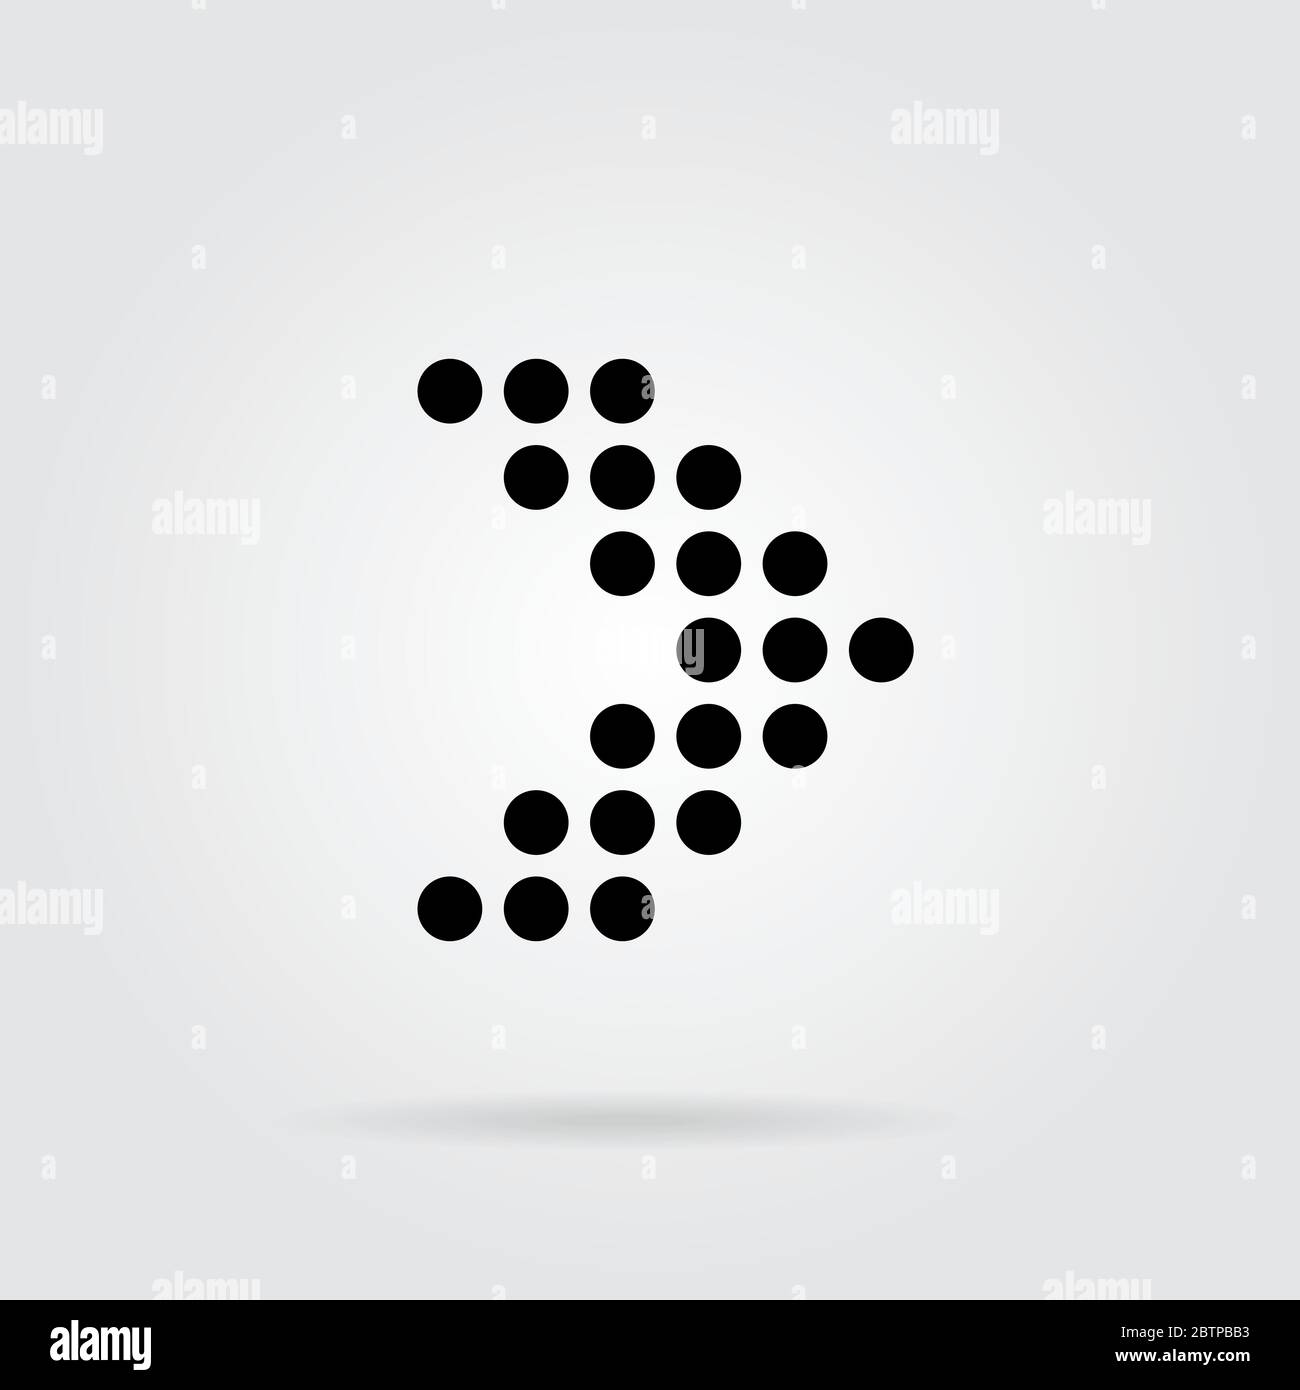 Dot arrow icon. Halftone effect. Isolated graphic element. Stock - Vector illustration. Stock Vector